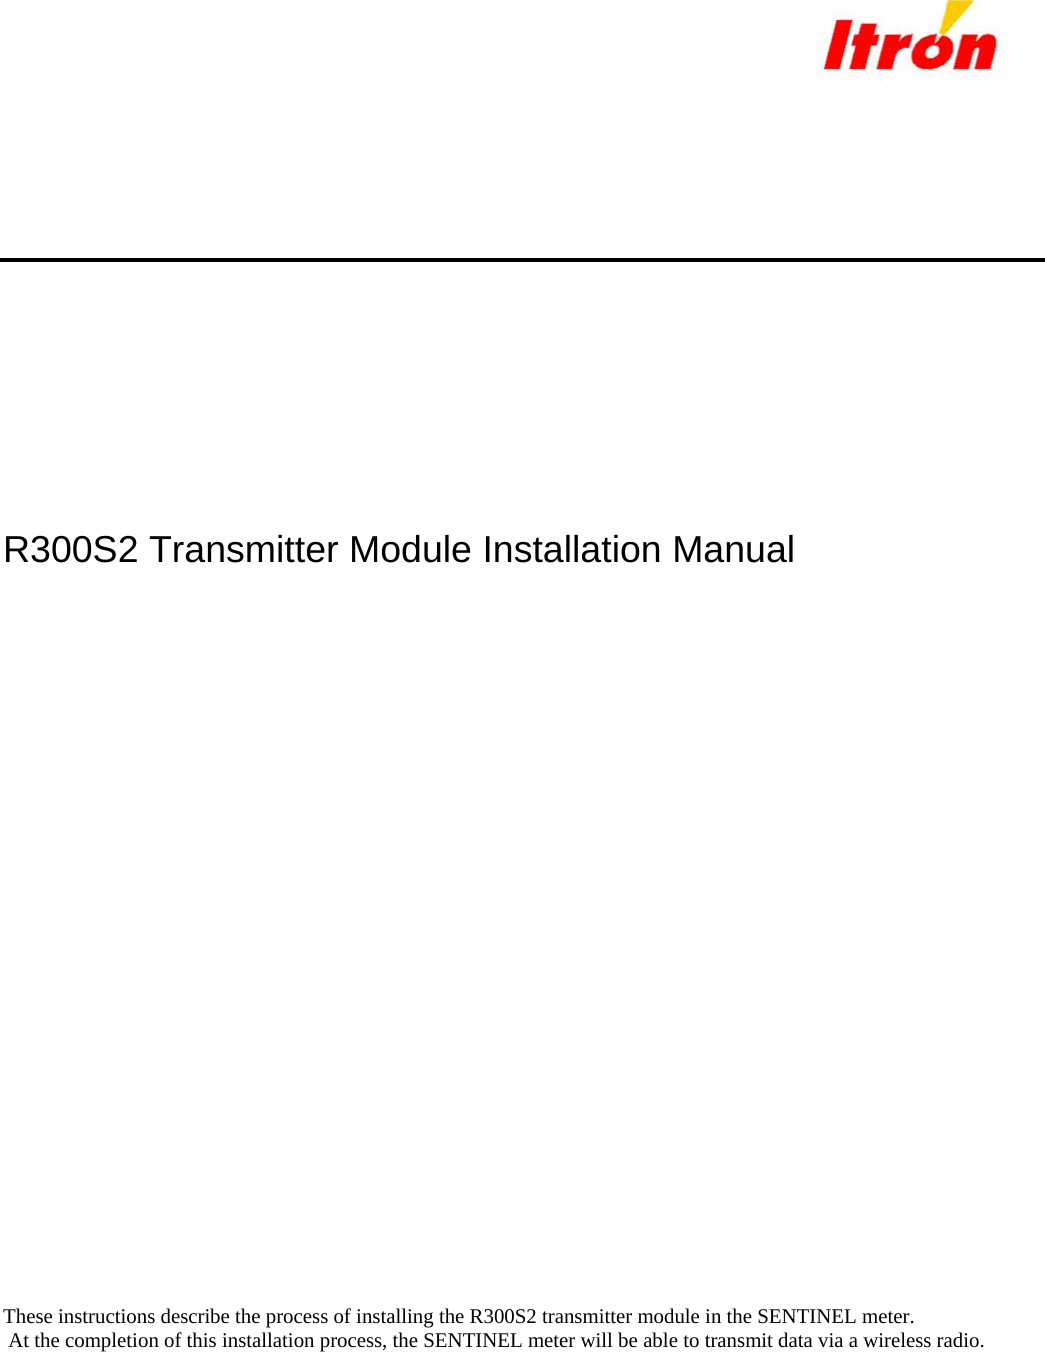           R300S2 Transmitter Module Installation Manual                               These instructions describe the process of installing the R300S2 transmitter module in the SENTINEL meter. At the completion of this installation process, the SENTINEL meter will be able to transmit data via a wireless radio.    